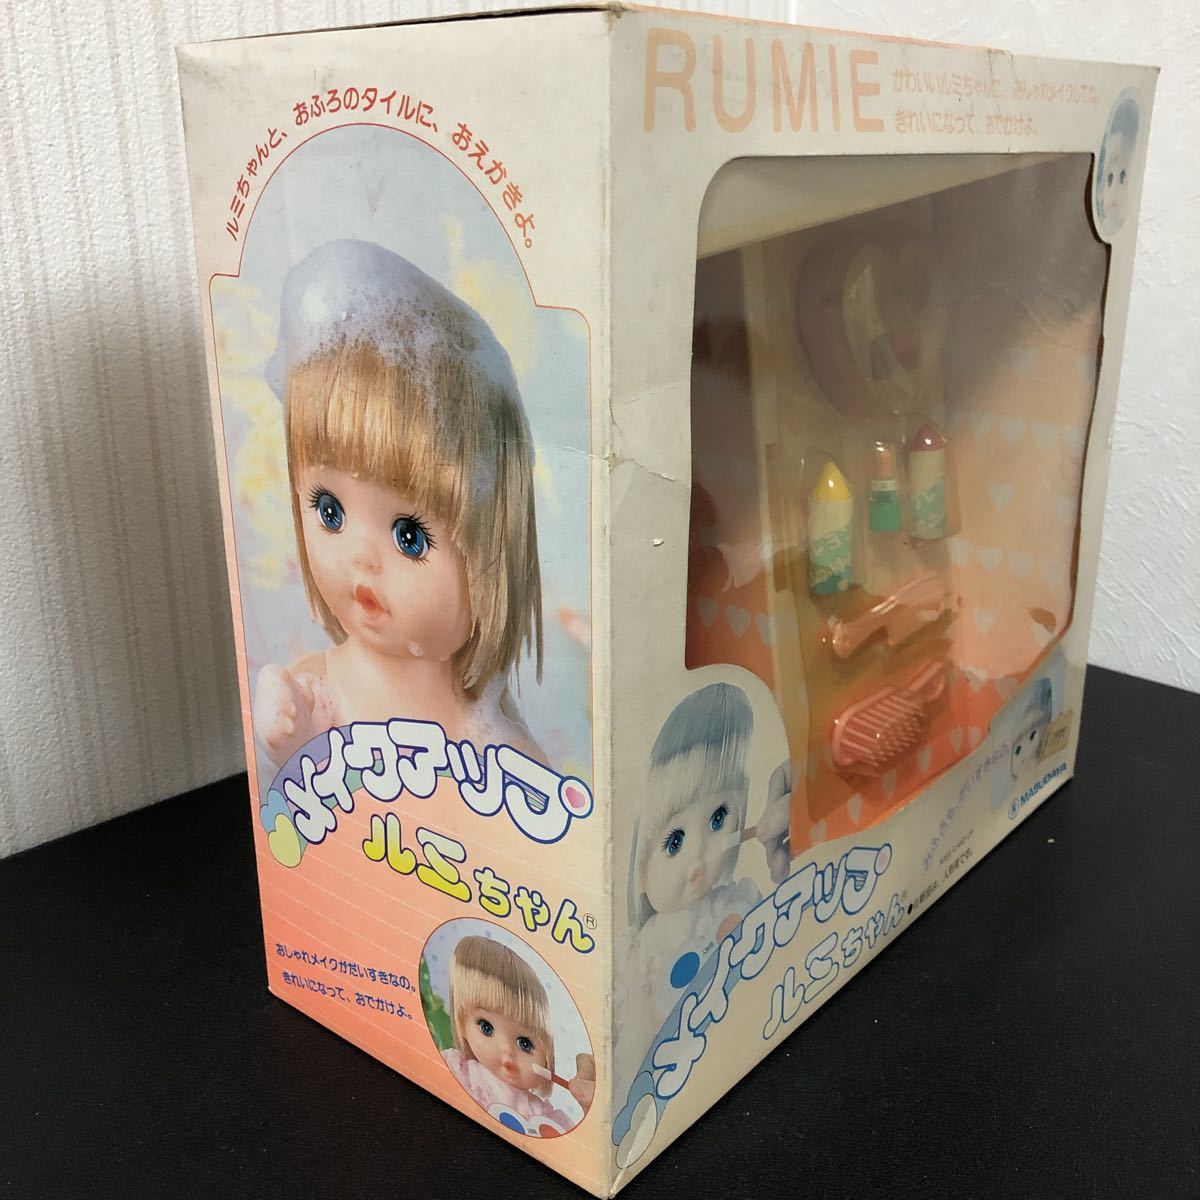 *② make-up rumi Chan increase rice field shop 1987 made in Japan retro toy toy doll unused goods 